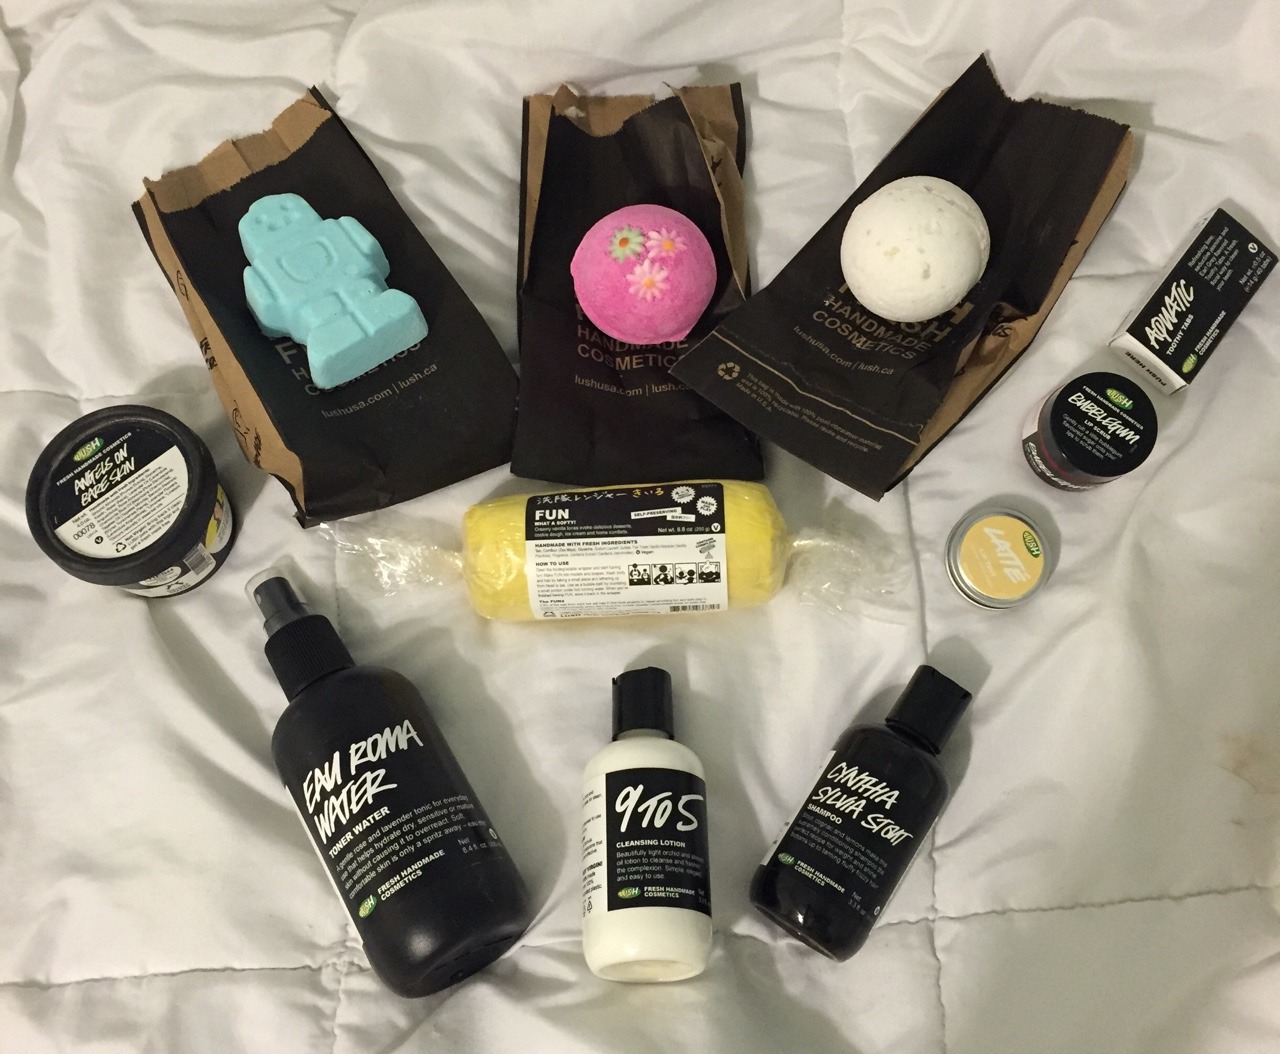 jewlsies:  summer lush giveaway!! :-) i thought i would do one more for the end of